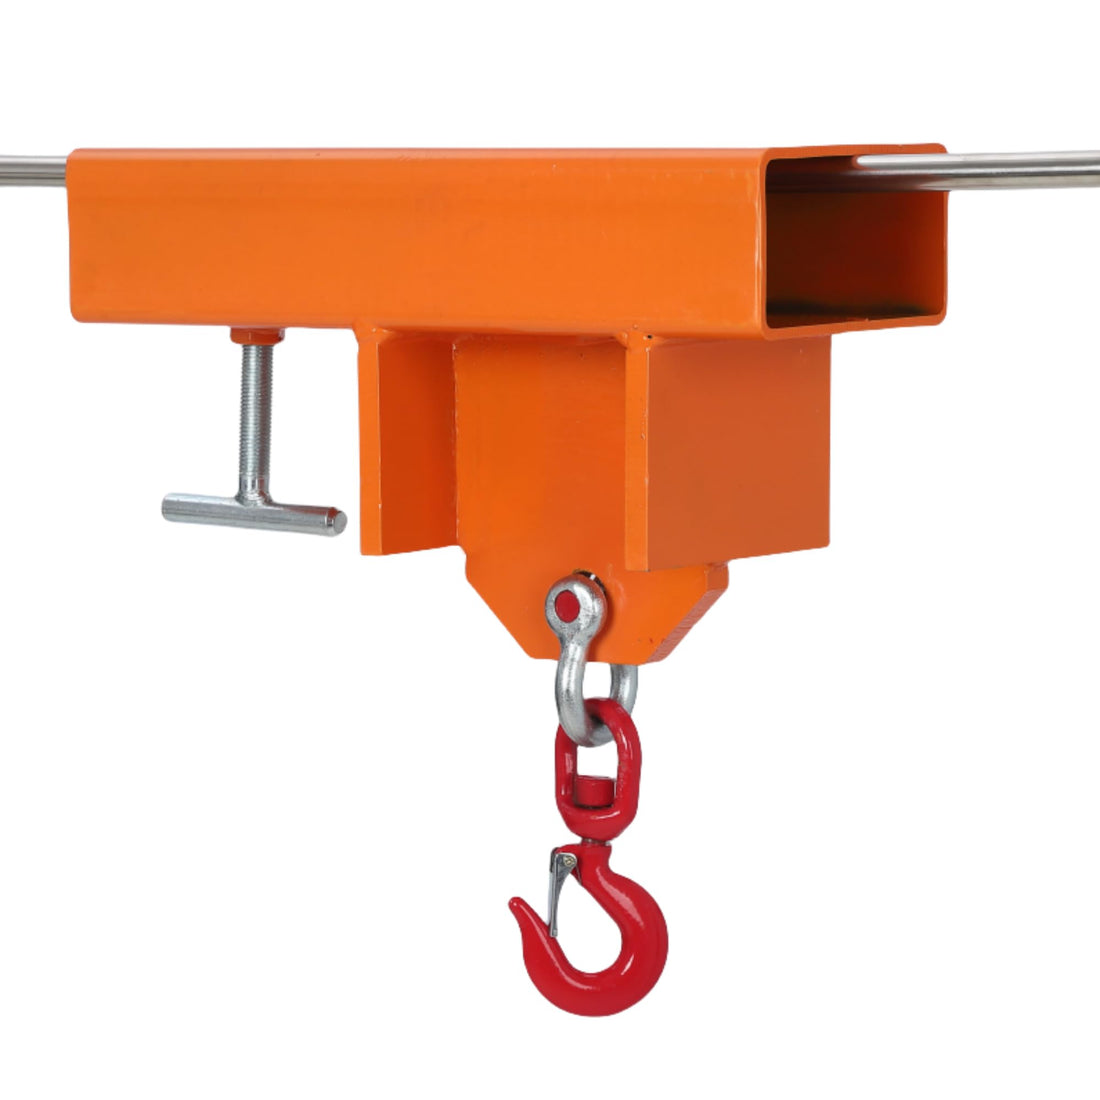 Forklift Lifting Hook Attachment 2200lbs Capacity Forklift Lifting Hoist